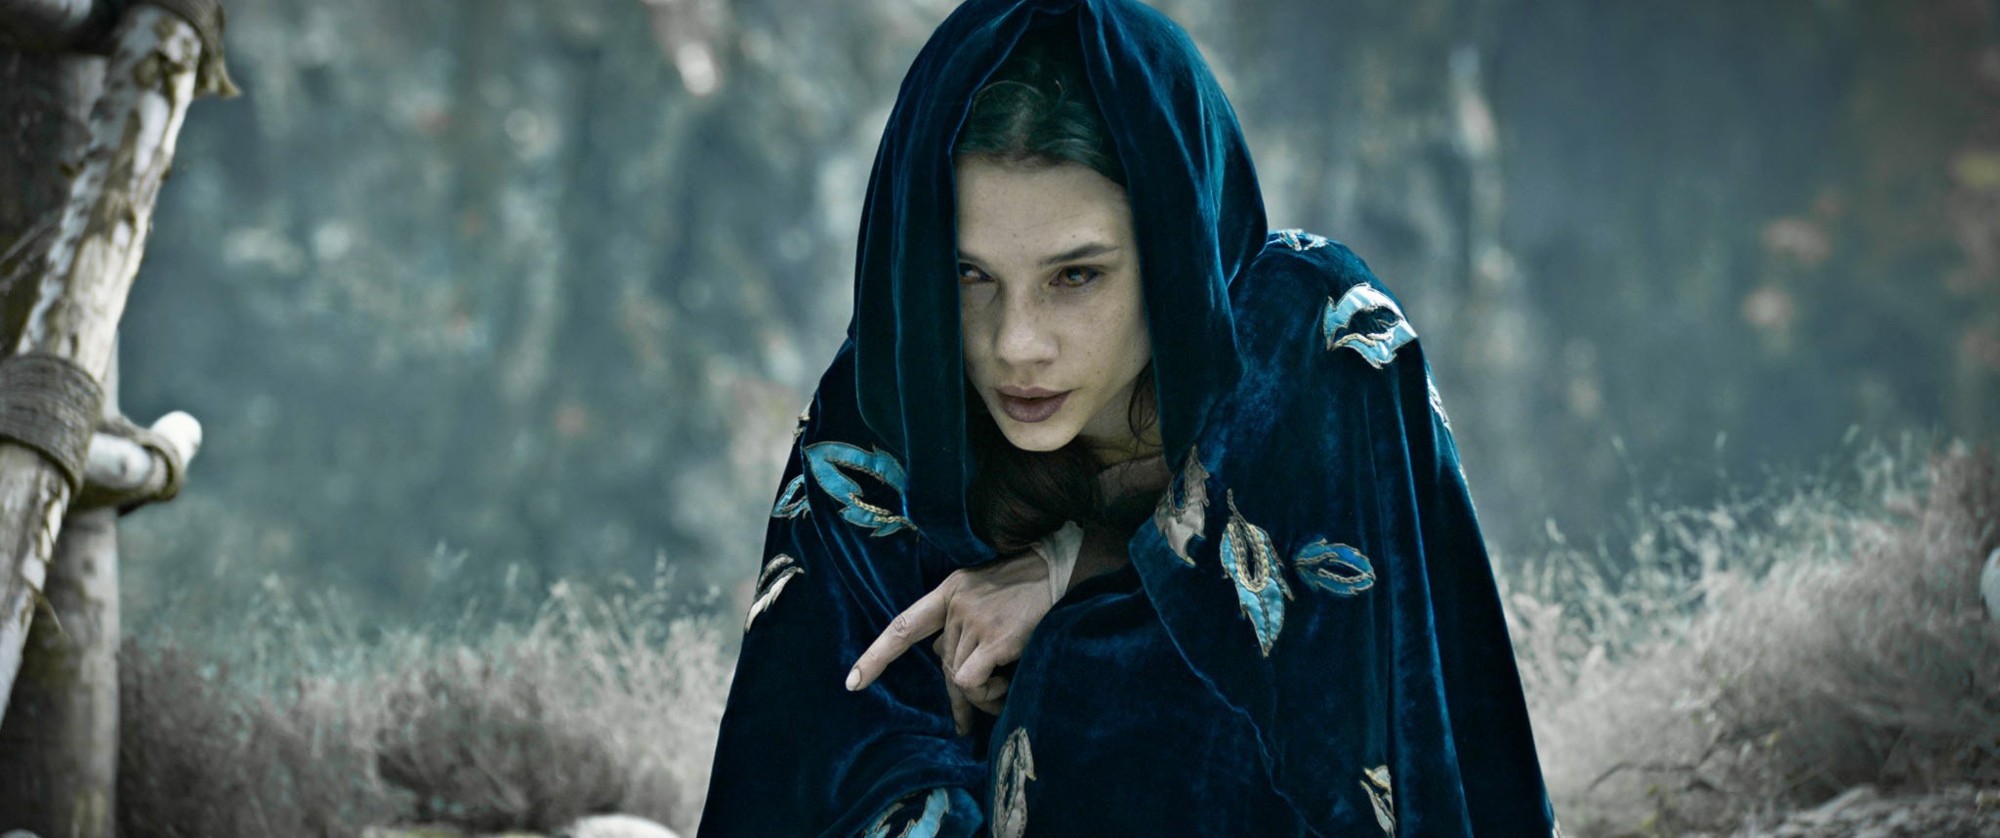 Astrid Berges-Frisbey stars as The Mage in Warner Bros. Pictures' King Arthur: Legend of the Sword (2017